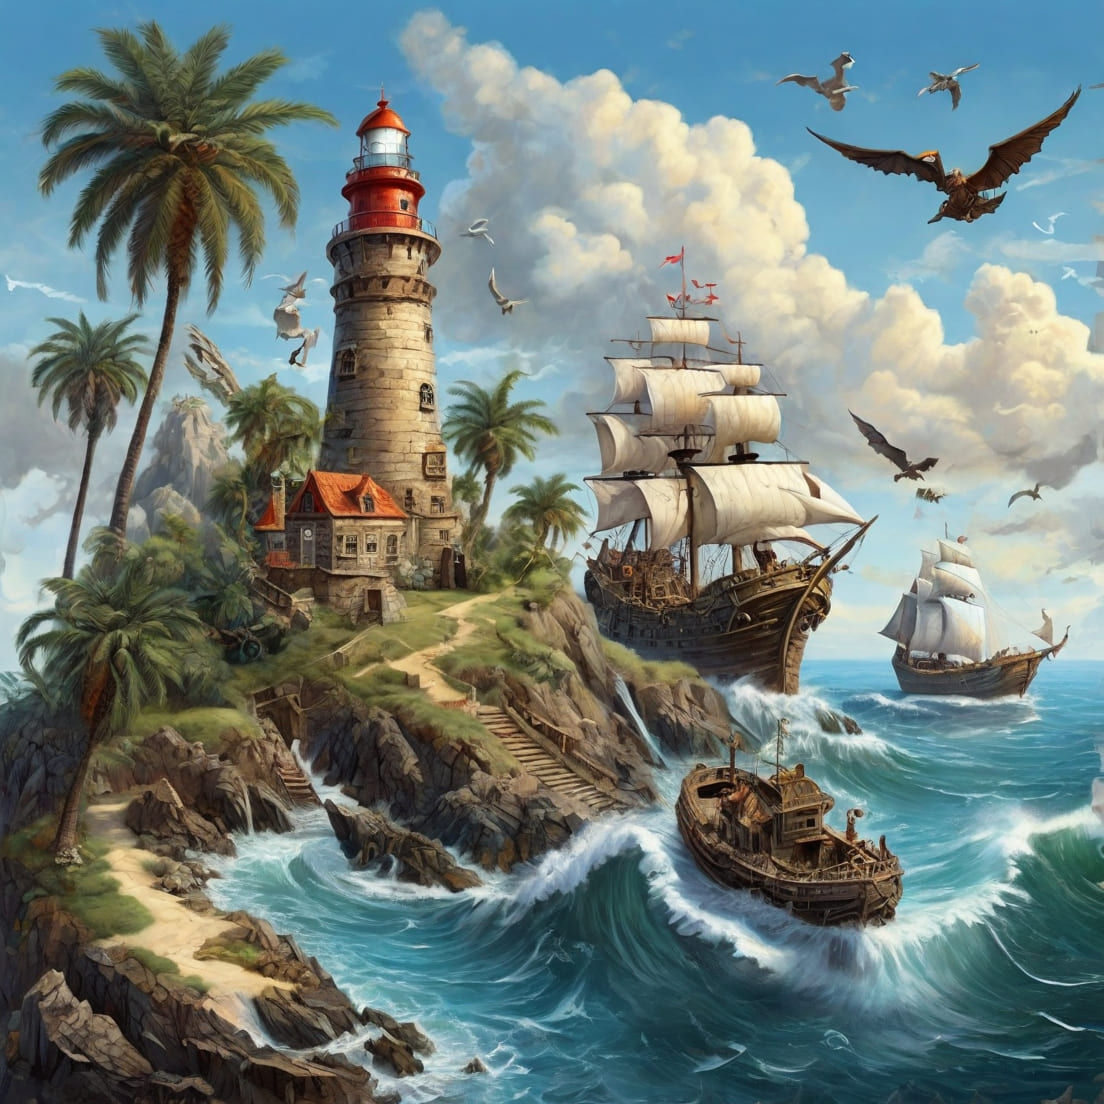 pirates, seagulls, palm trees, dragons, lighthouse on the island and ship in the waves preview image.